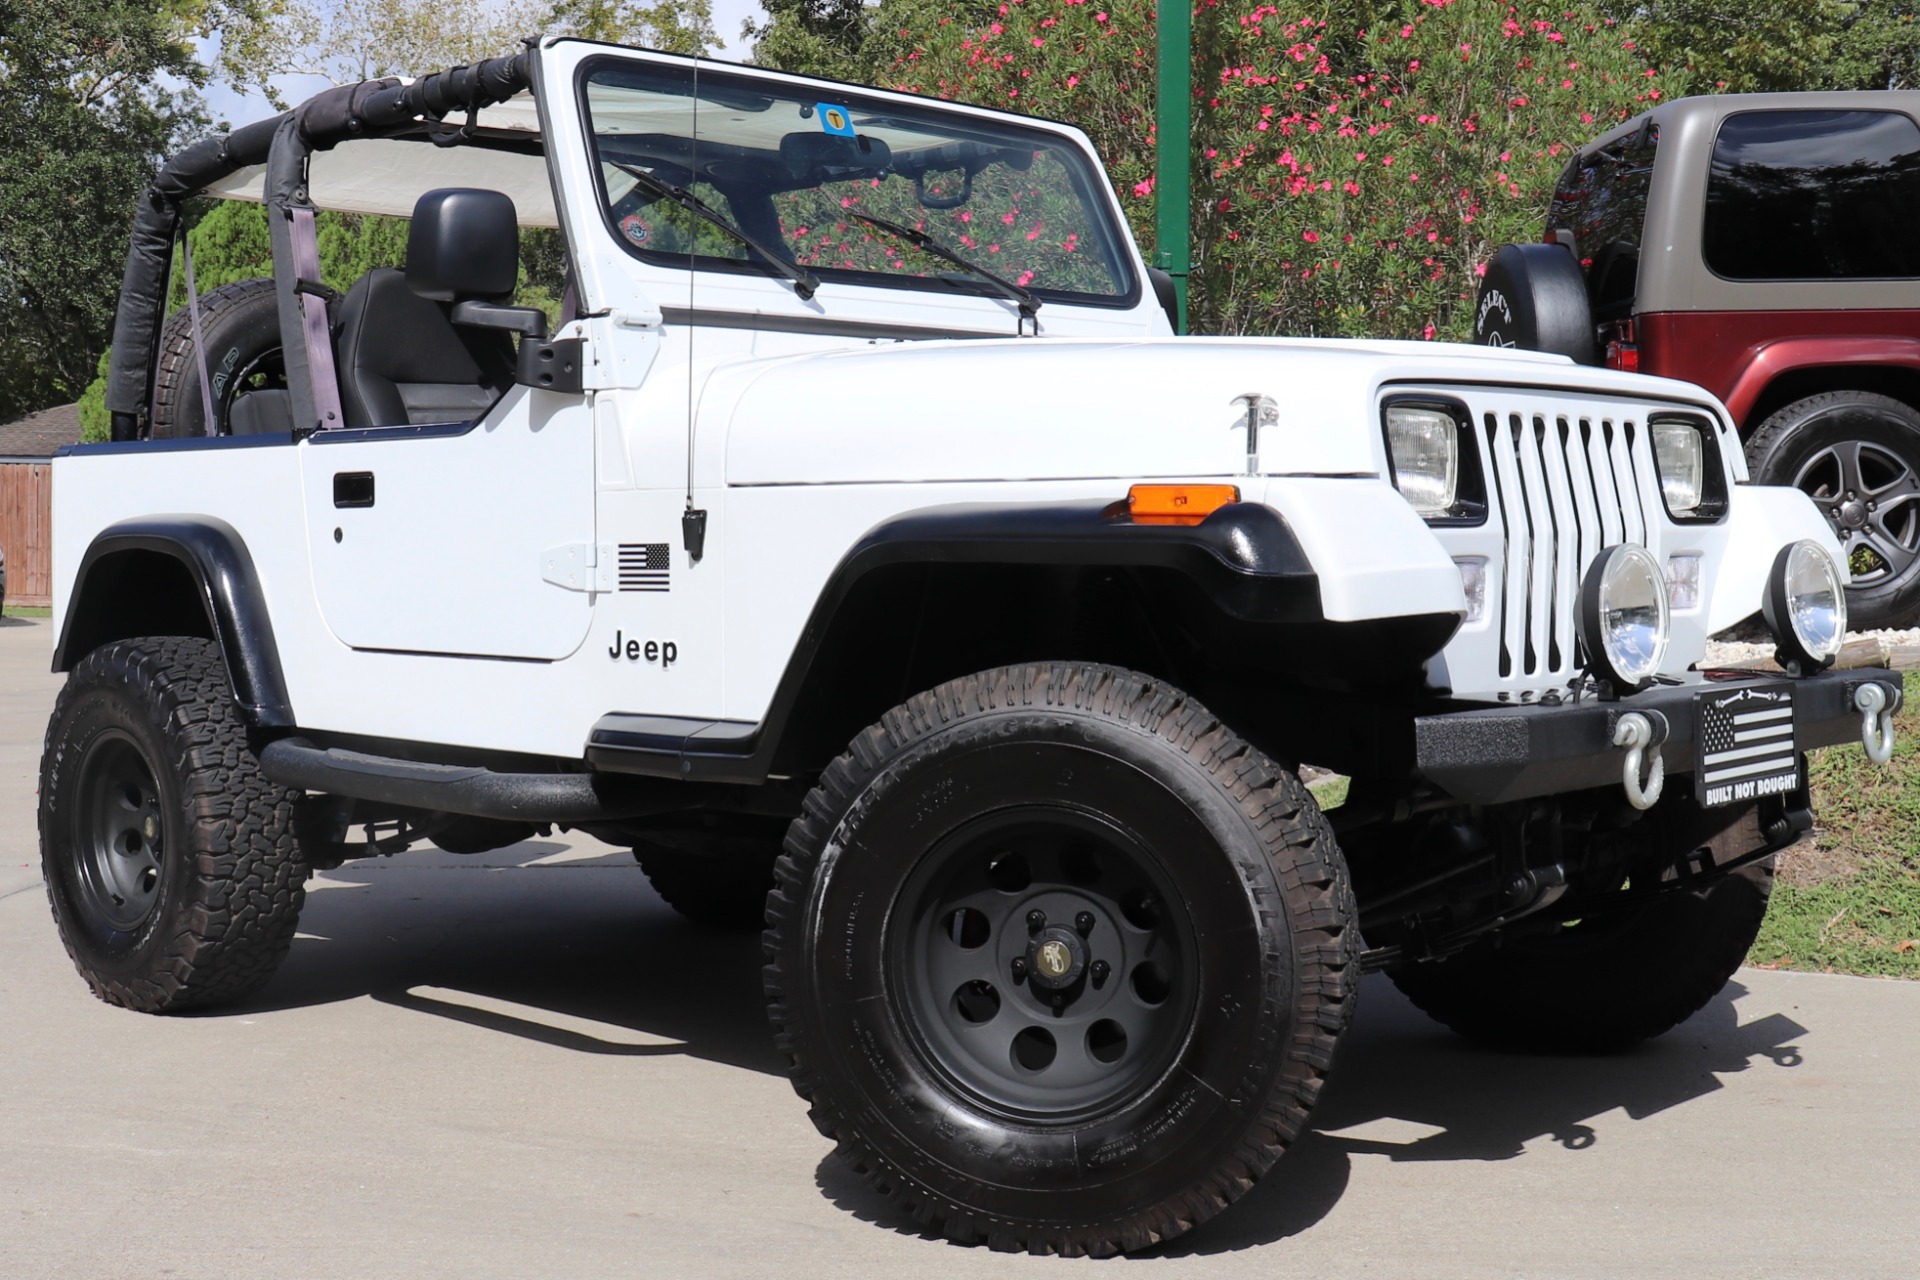 Used 1995 Jeep Wrangler For Sale ($10,995) | Select Jeeps Inc. Stock #272262